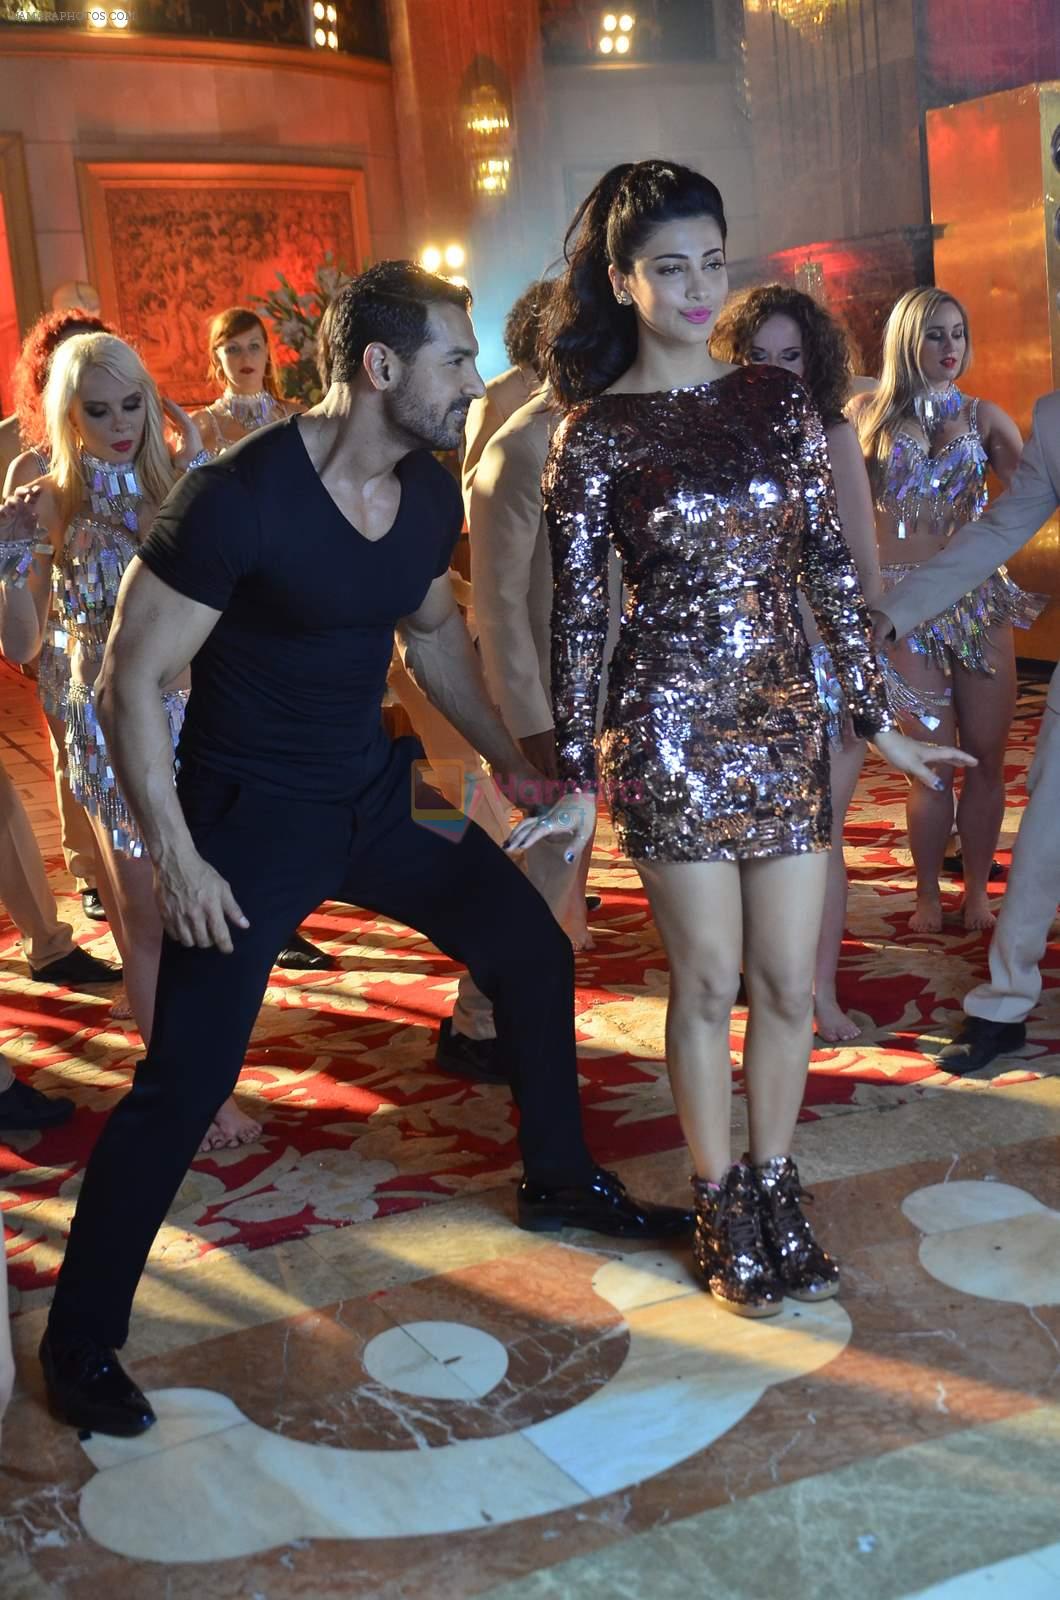 Shruti Haasan, John Abraham at Welcome Back song shoot in Aarey Milk Colony on 13th July 2015